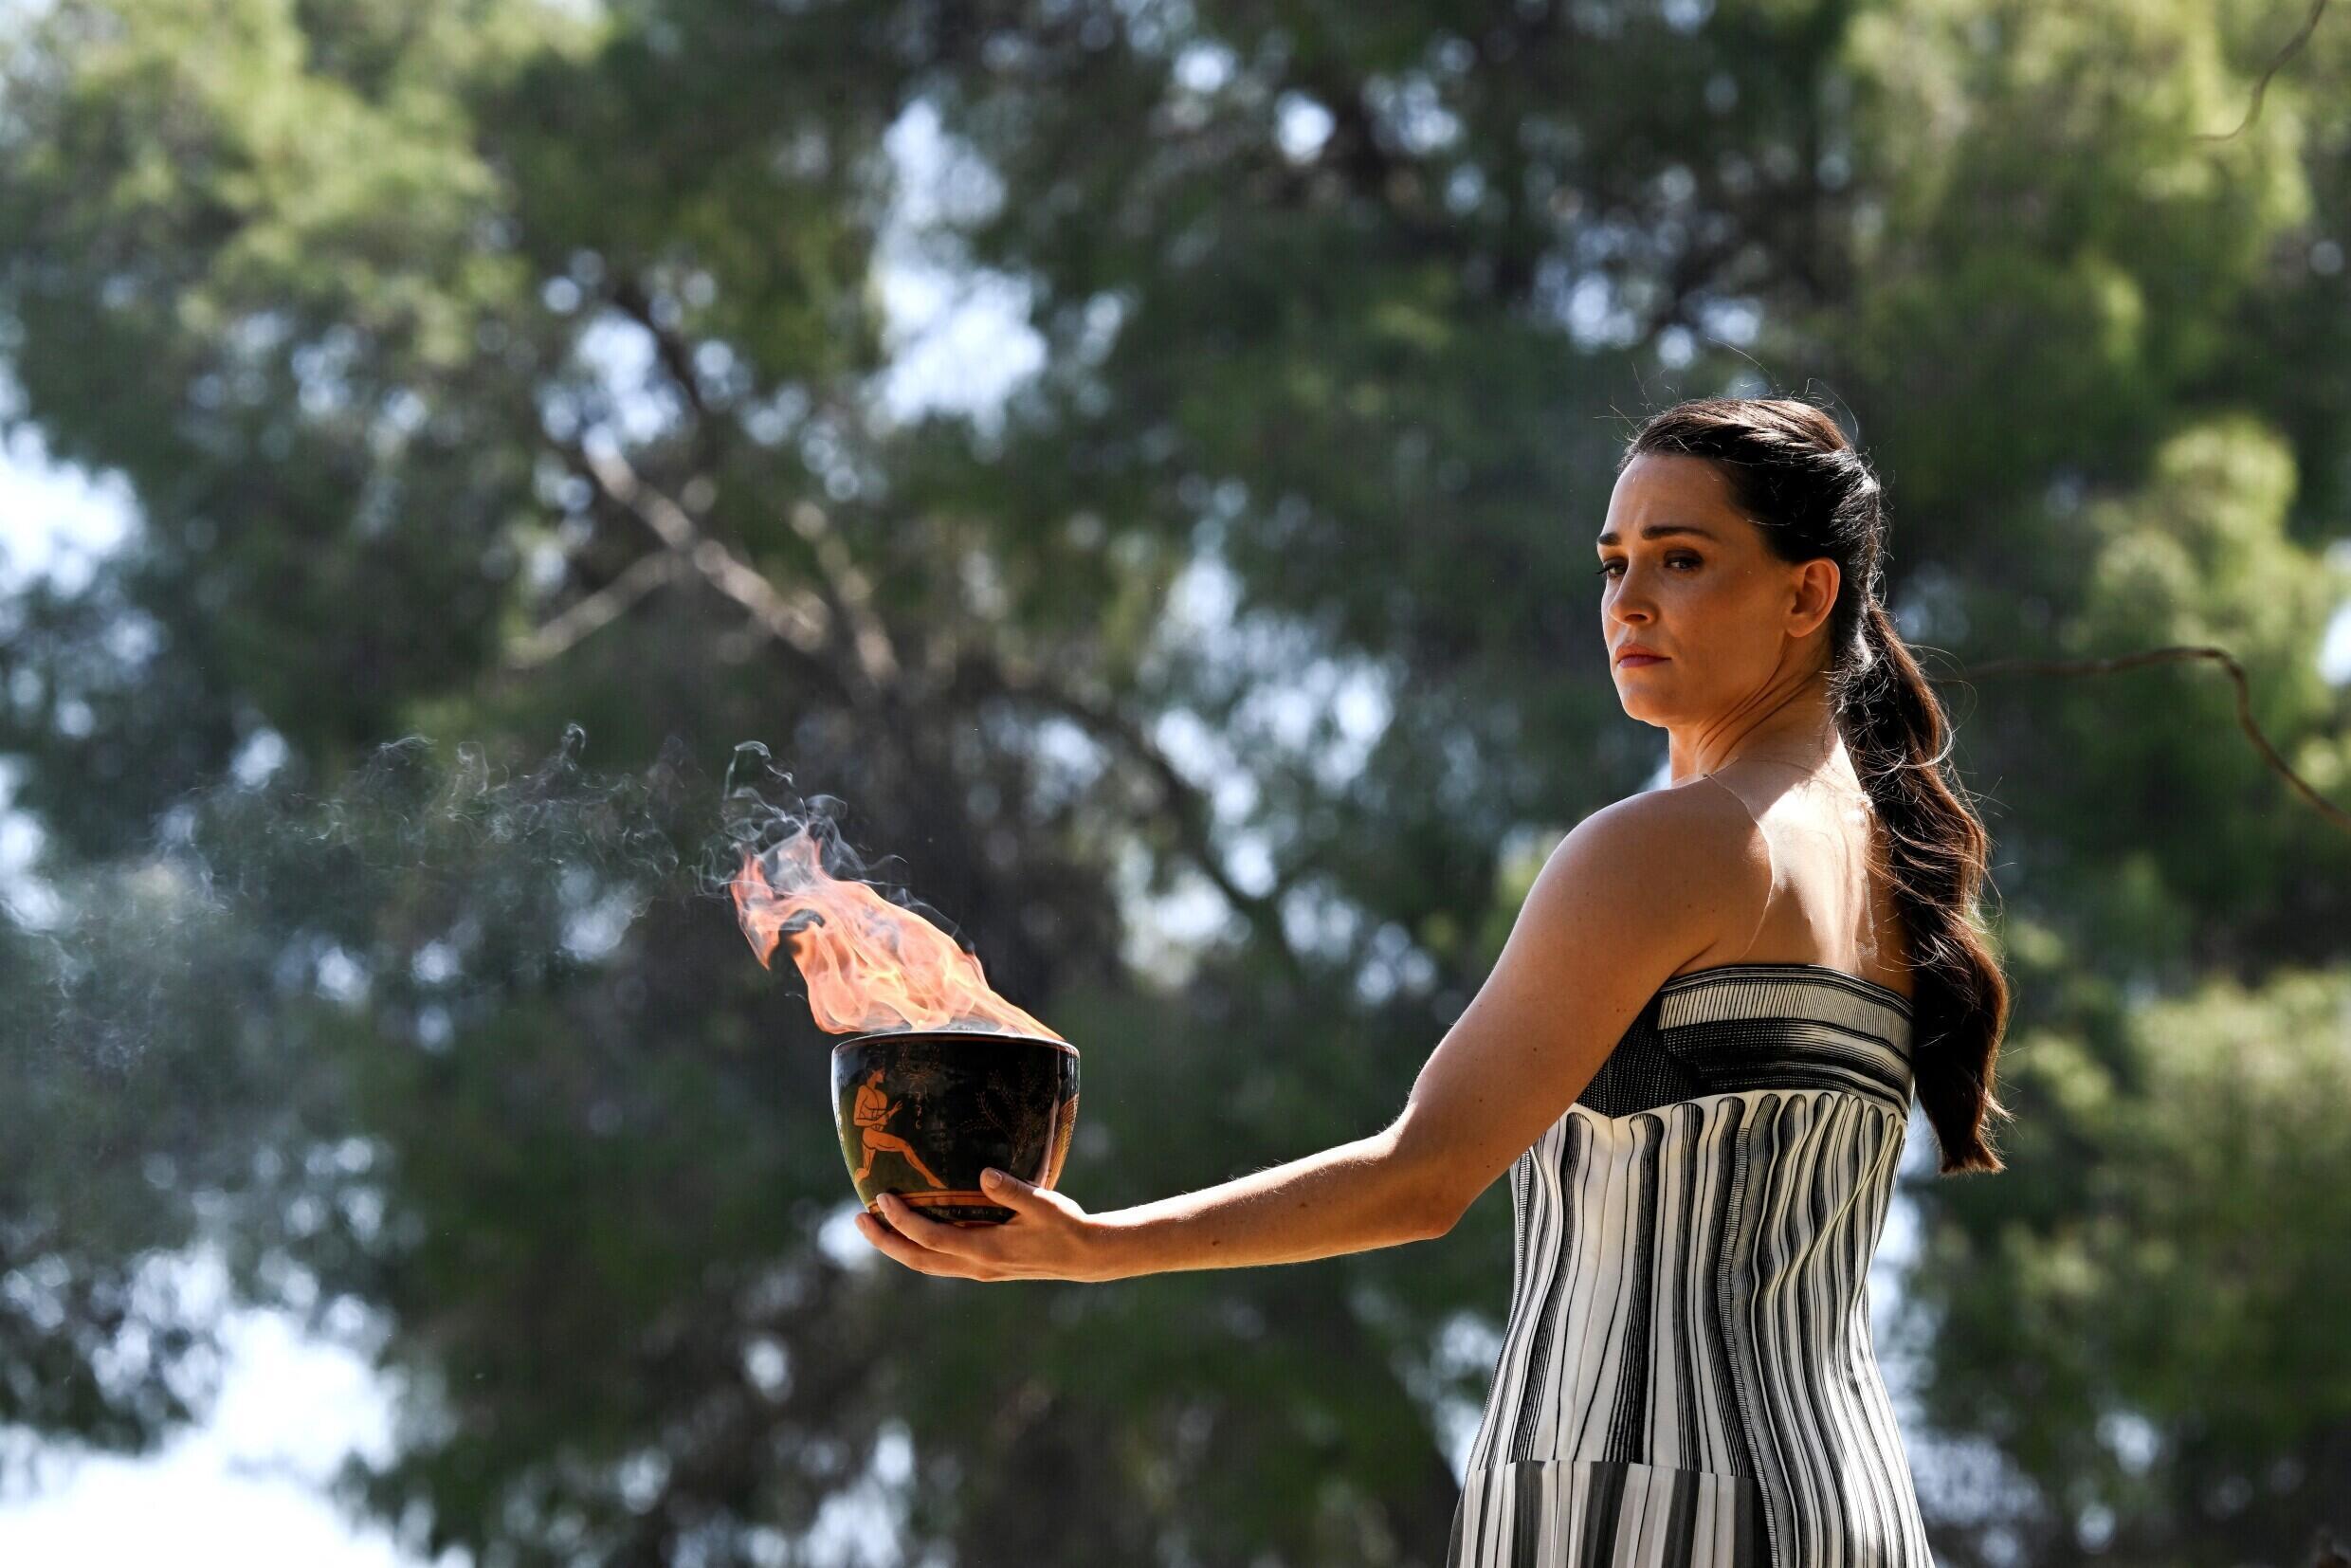 Greek actress Mary Mina, who plays the role of the High Priestess, holds the Olympic flame during the rehearsal of the flame lighting ceremony for the Paris 2024 Olympic Games at the ancient Temple of Hera at the archaeological site of Olympia, cradle of the ancient Olympic Games in southern Greece, on April 15, 2024.